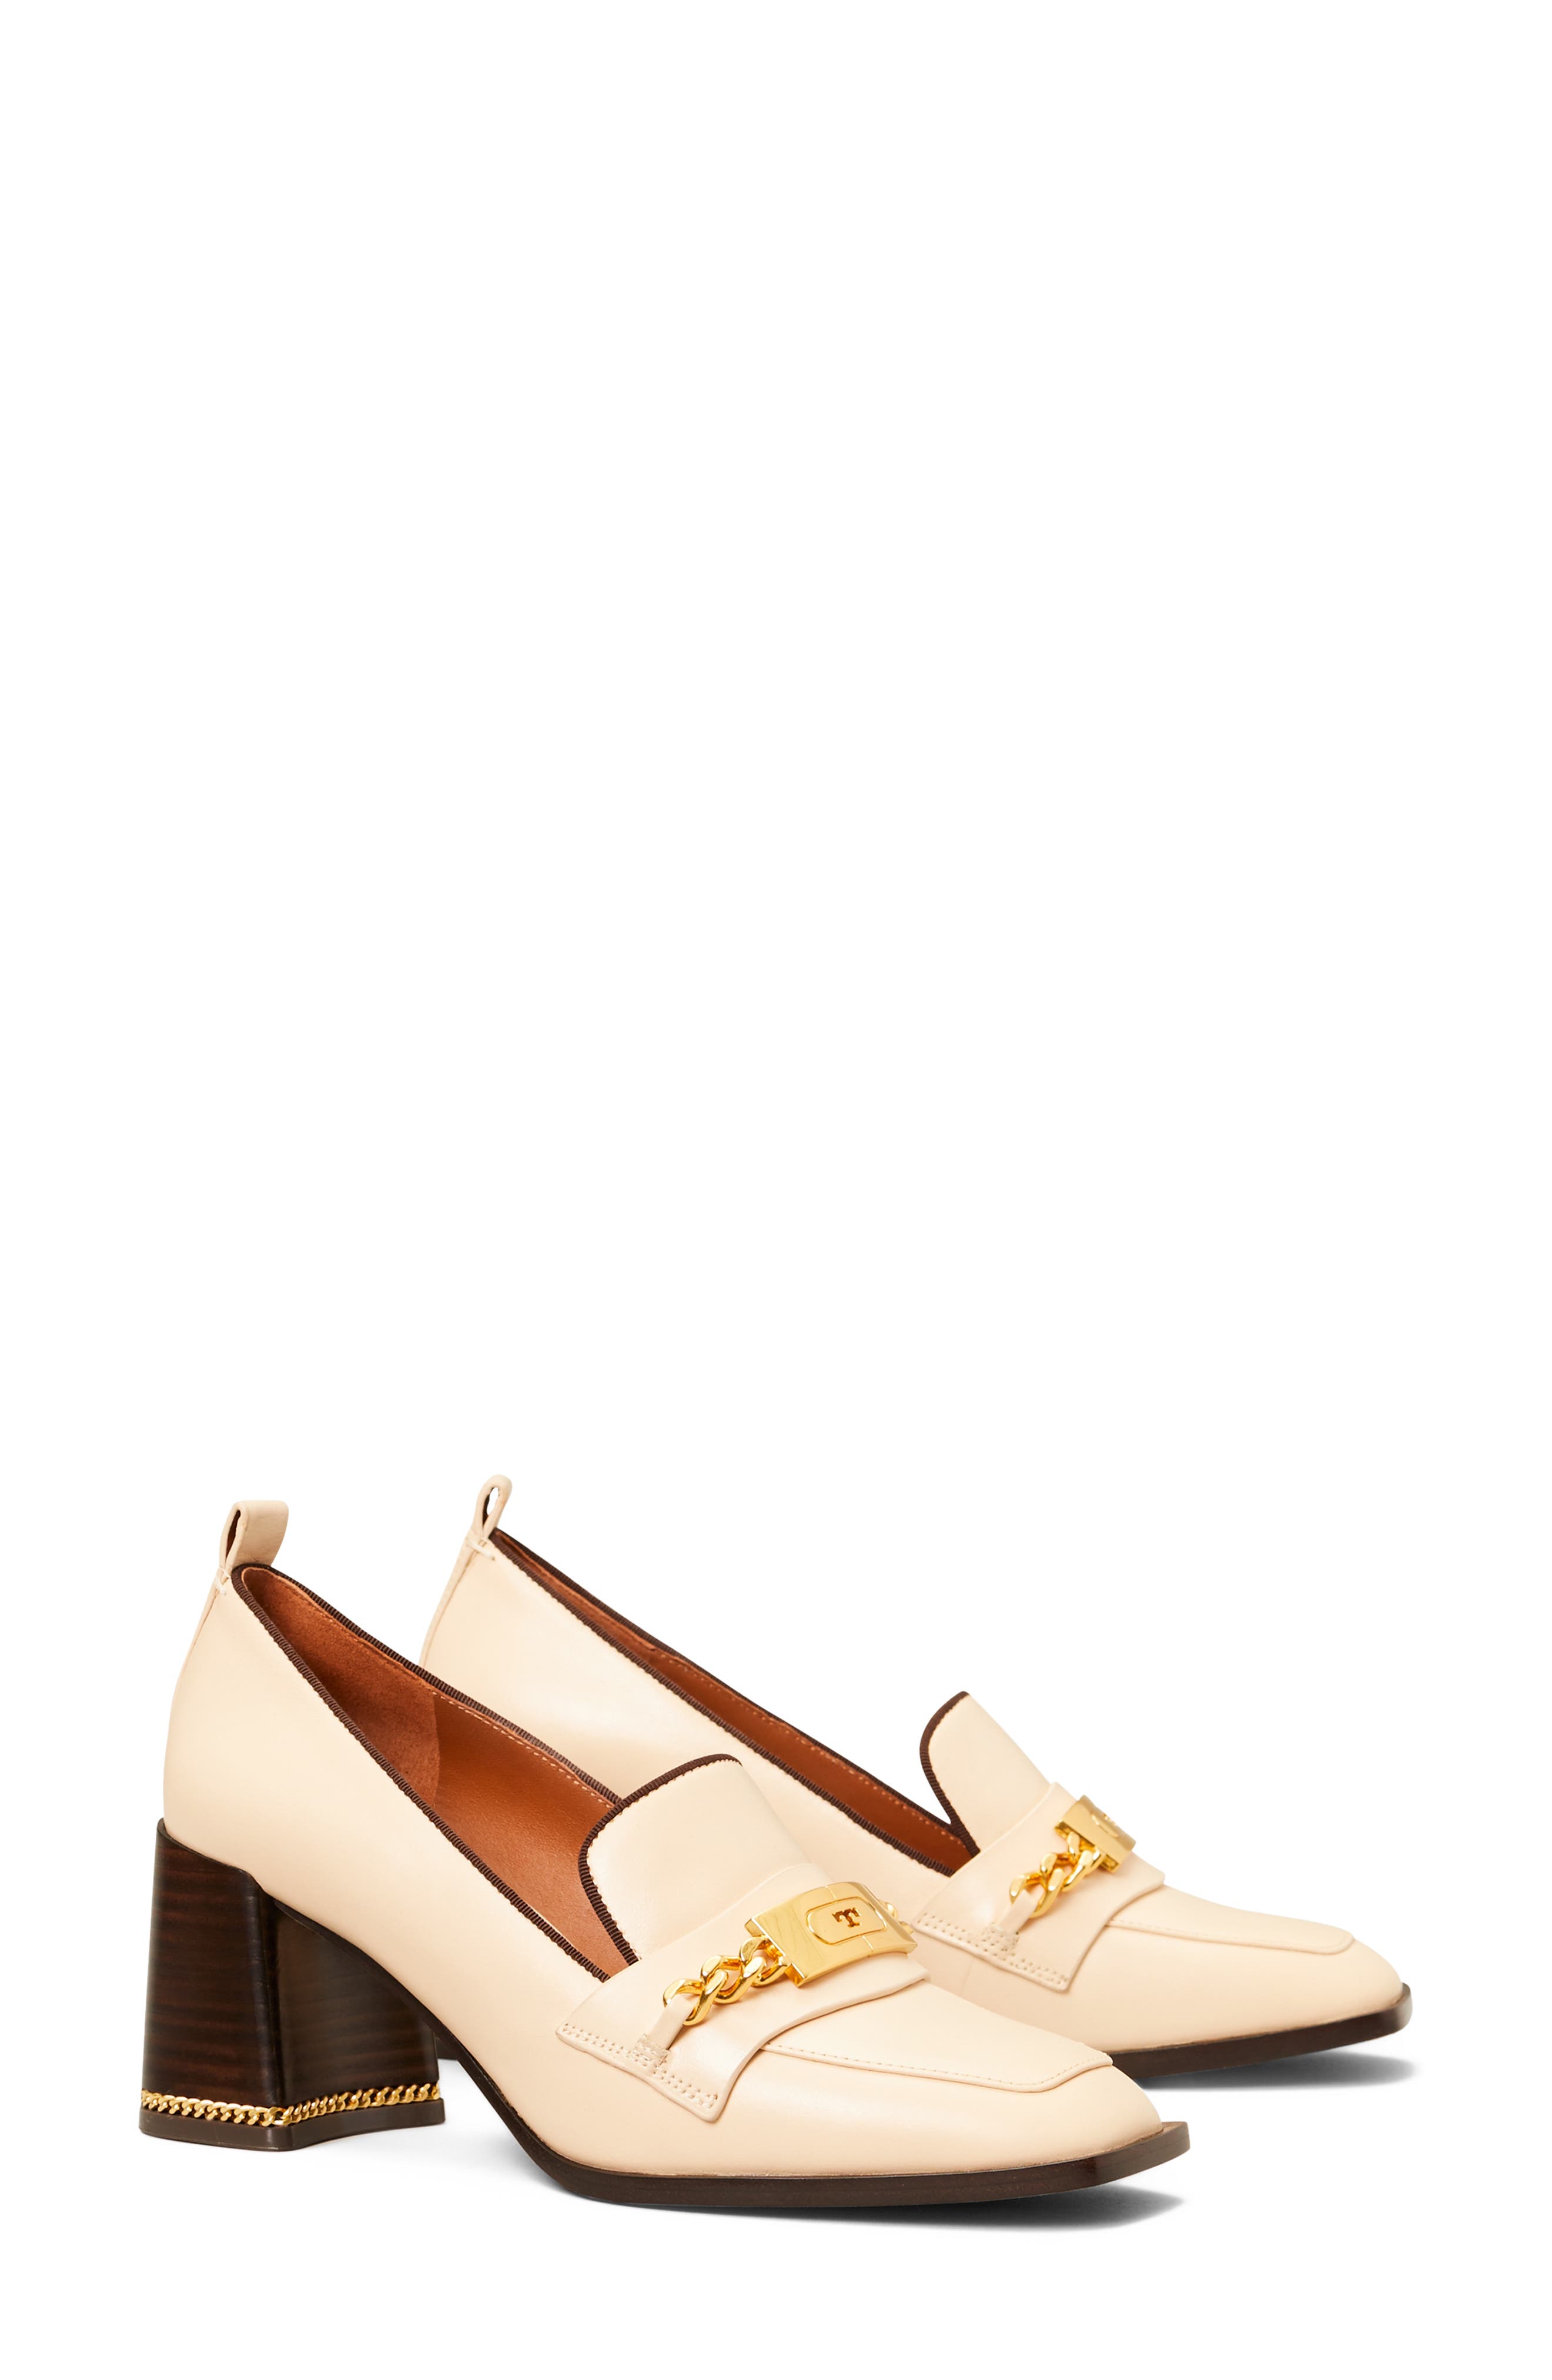 tory burch nude shoes